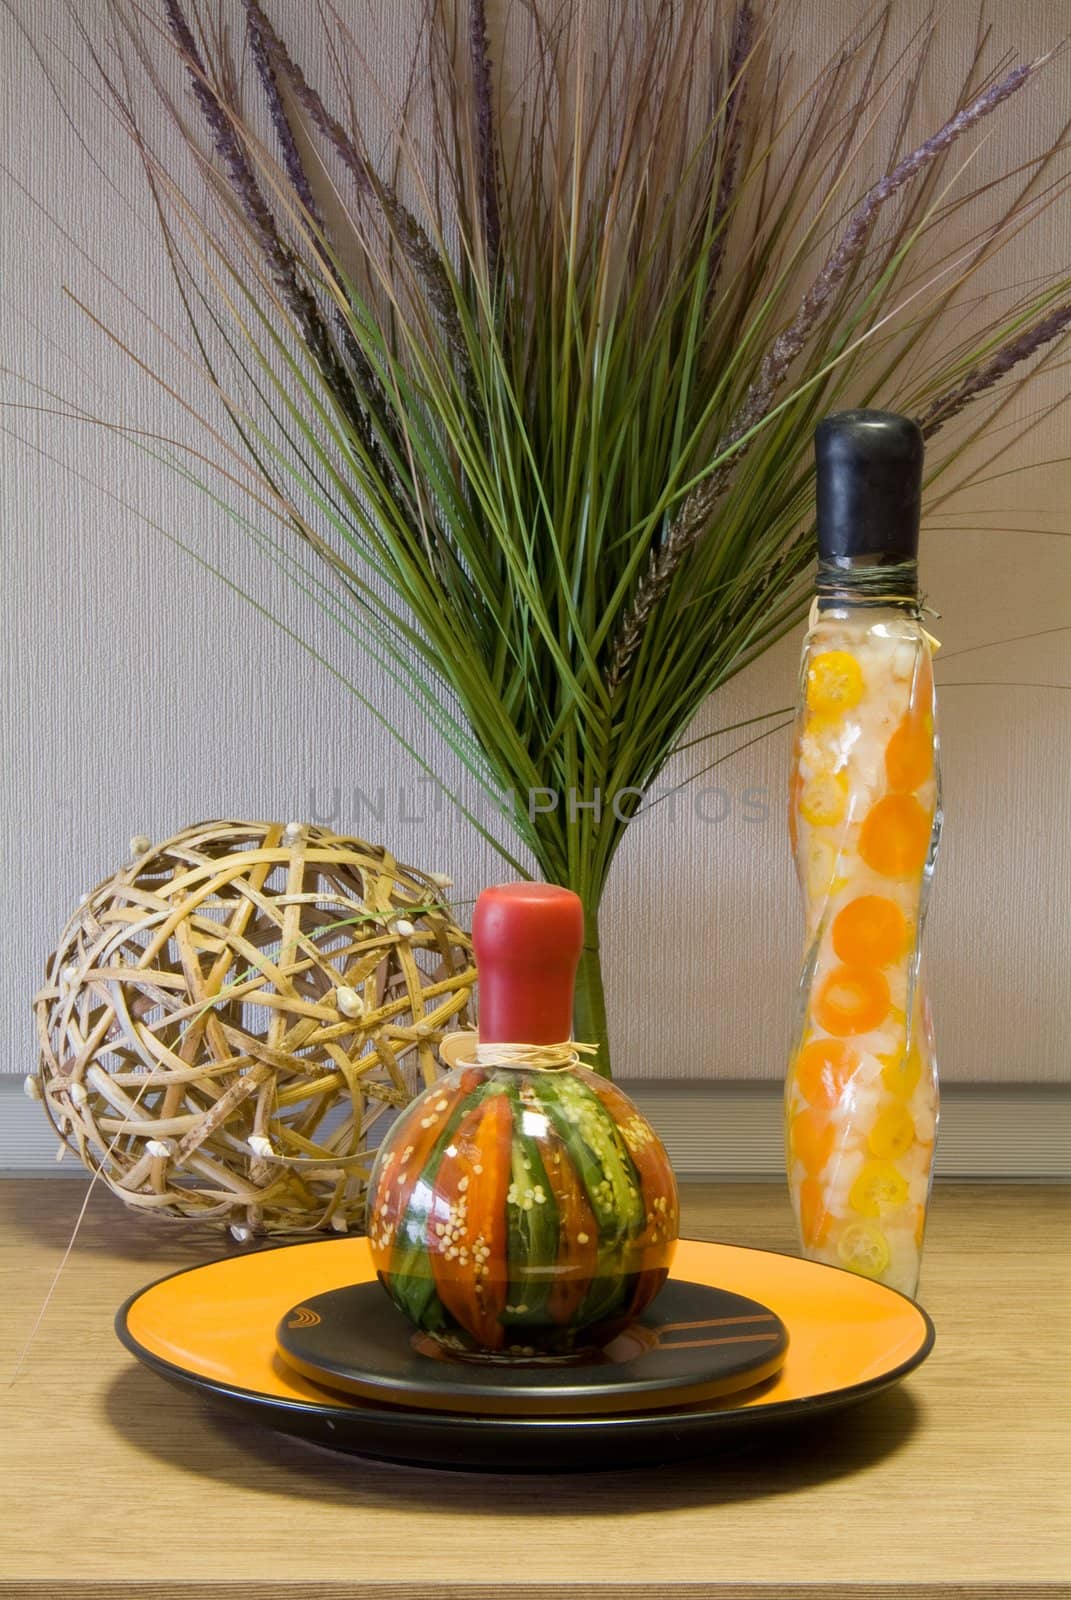 Decorative bottles, straw sphere, leaf and the ceramic plate on  by palomnik